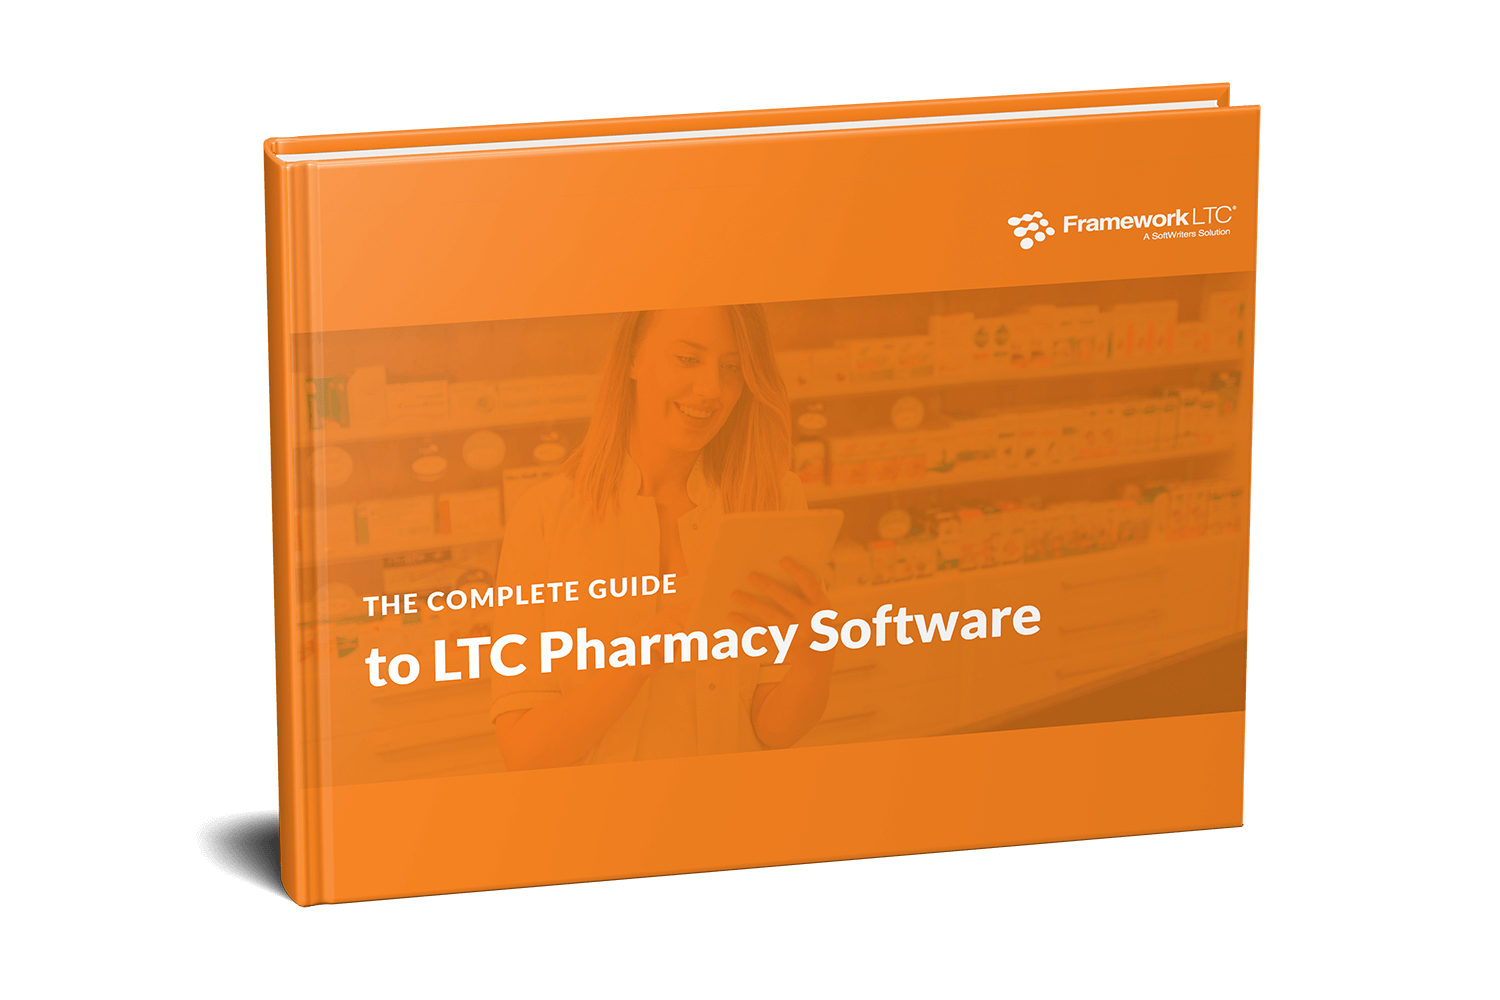 eBook_Complete-Guide-LTC-Pharmacy-Software_2